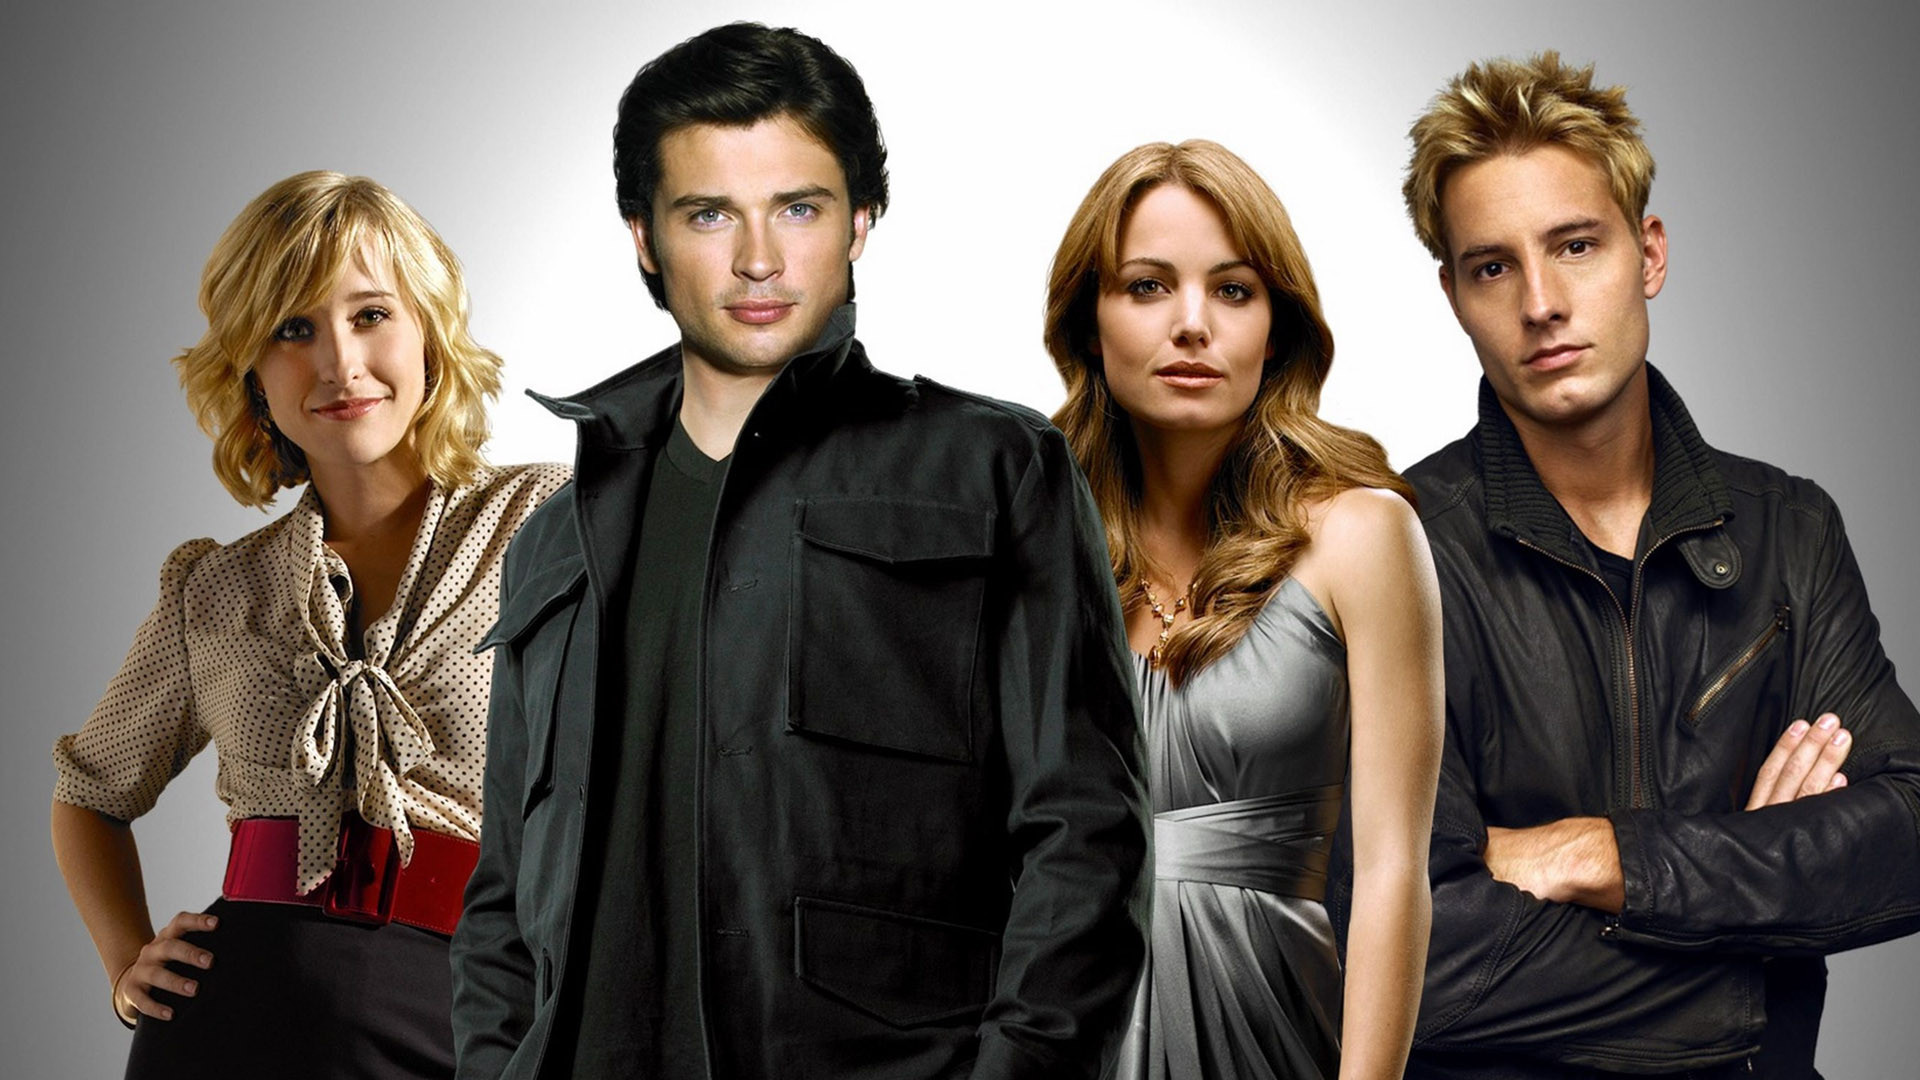 smallville wallpaper,hairstyle,fashion model,movie,photography,step cutting